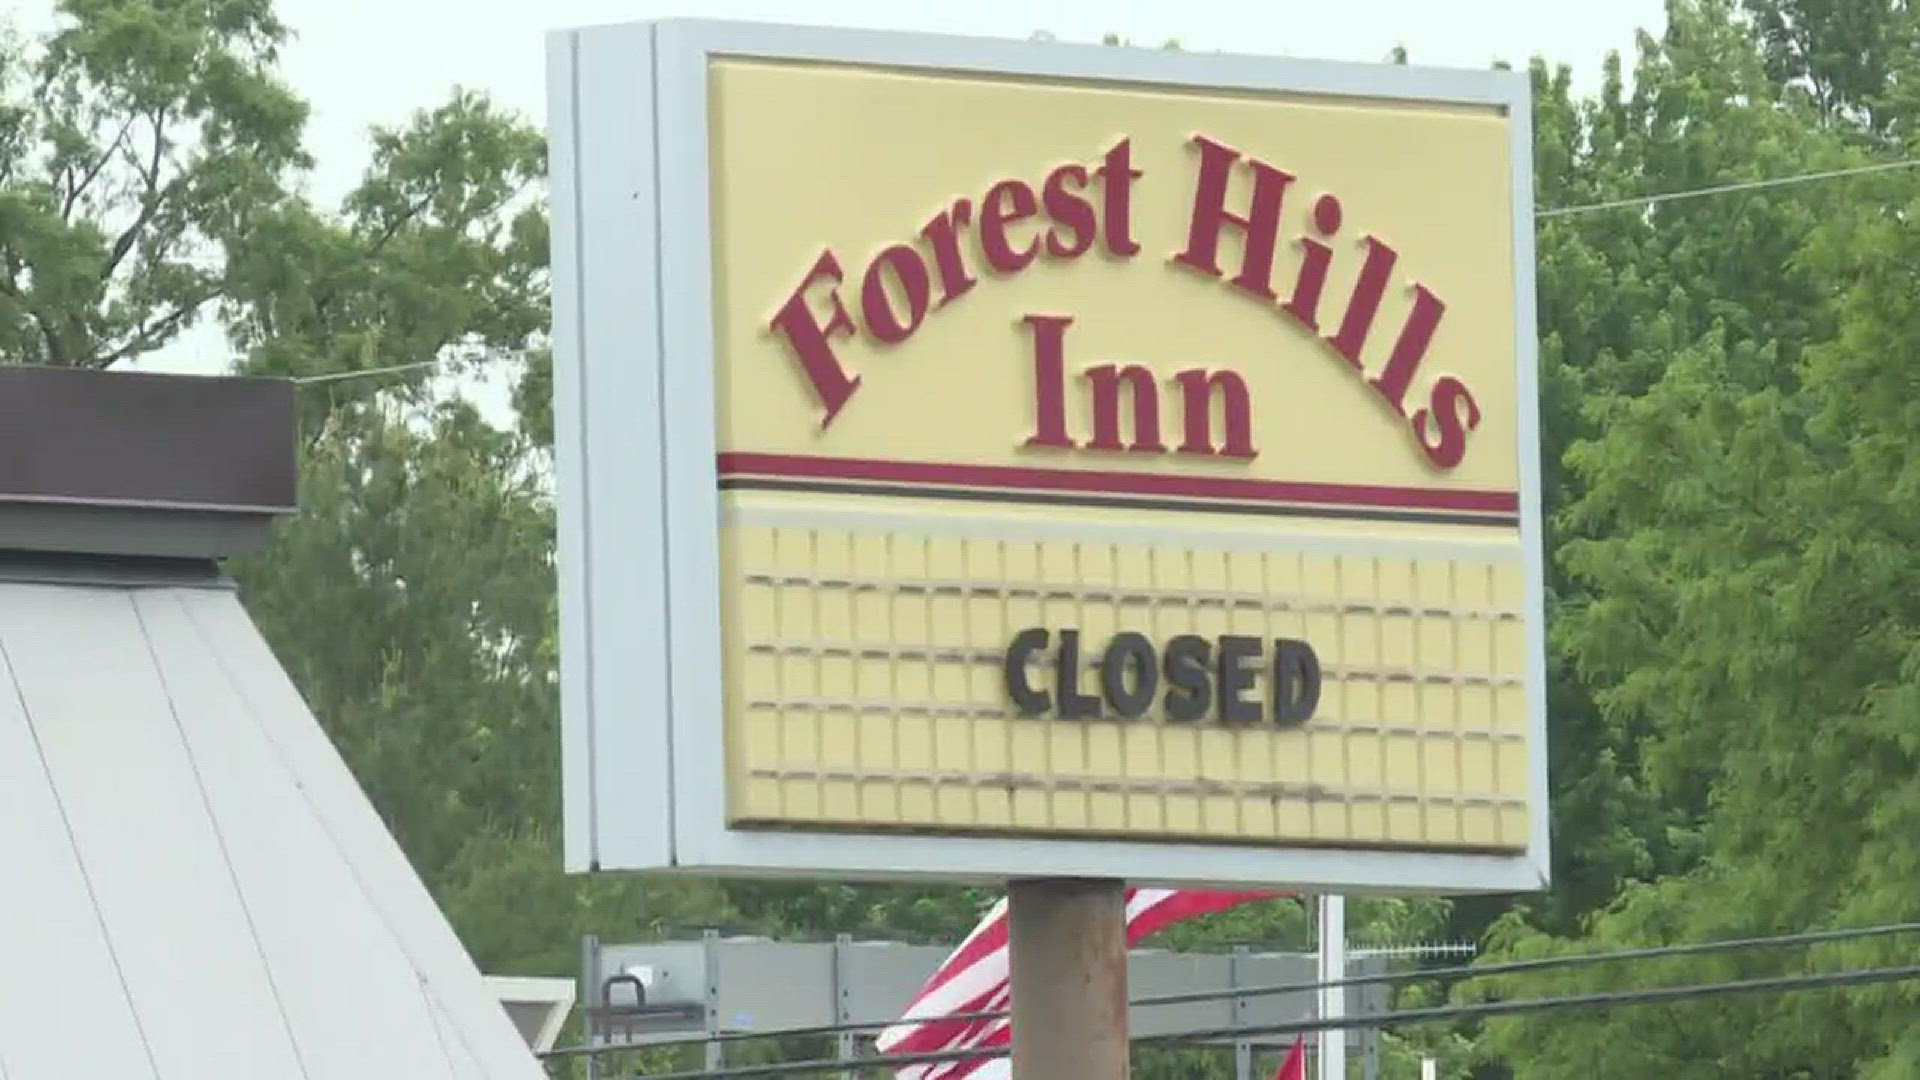 Construction work is finally underway on old Forest Hills Inn restaurant in Grand Rapids Township.